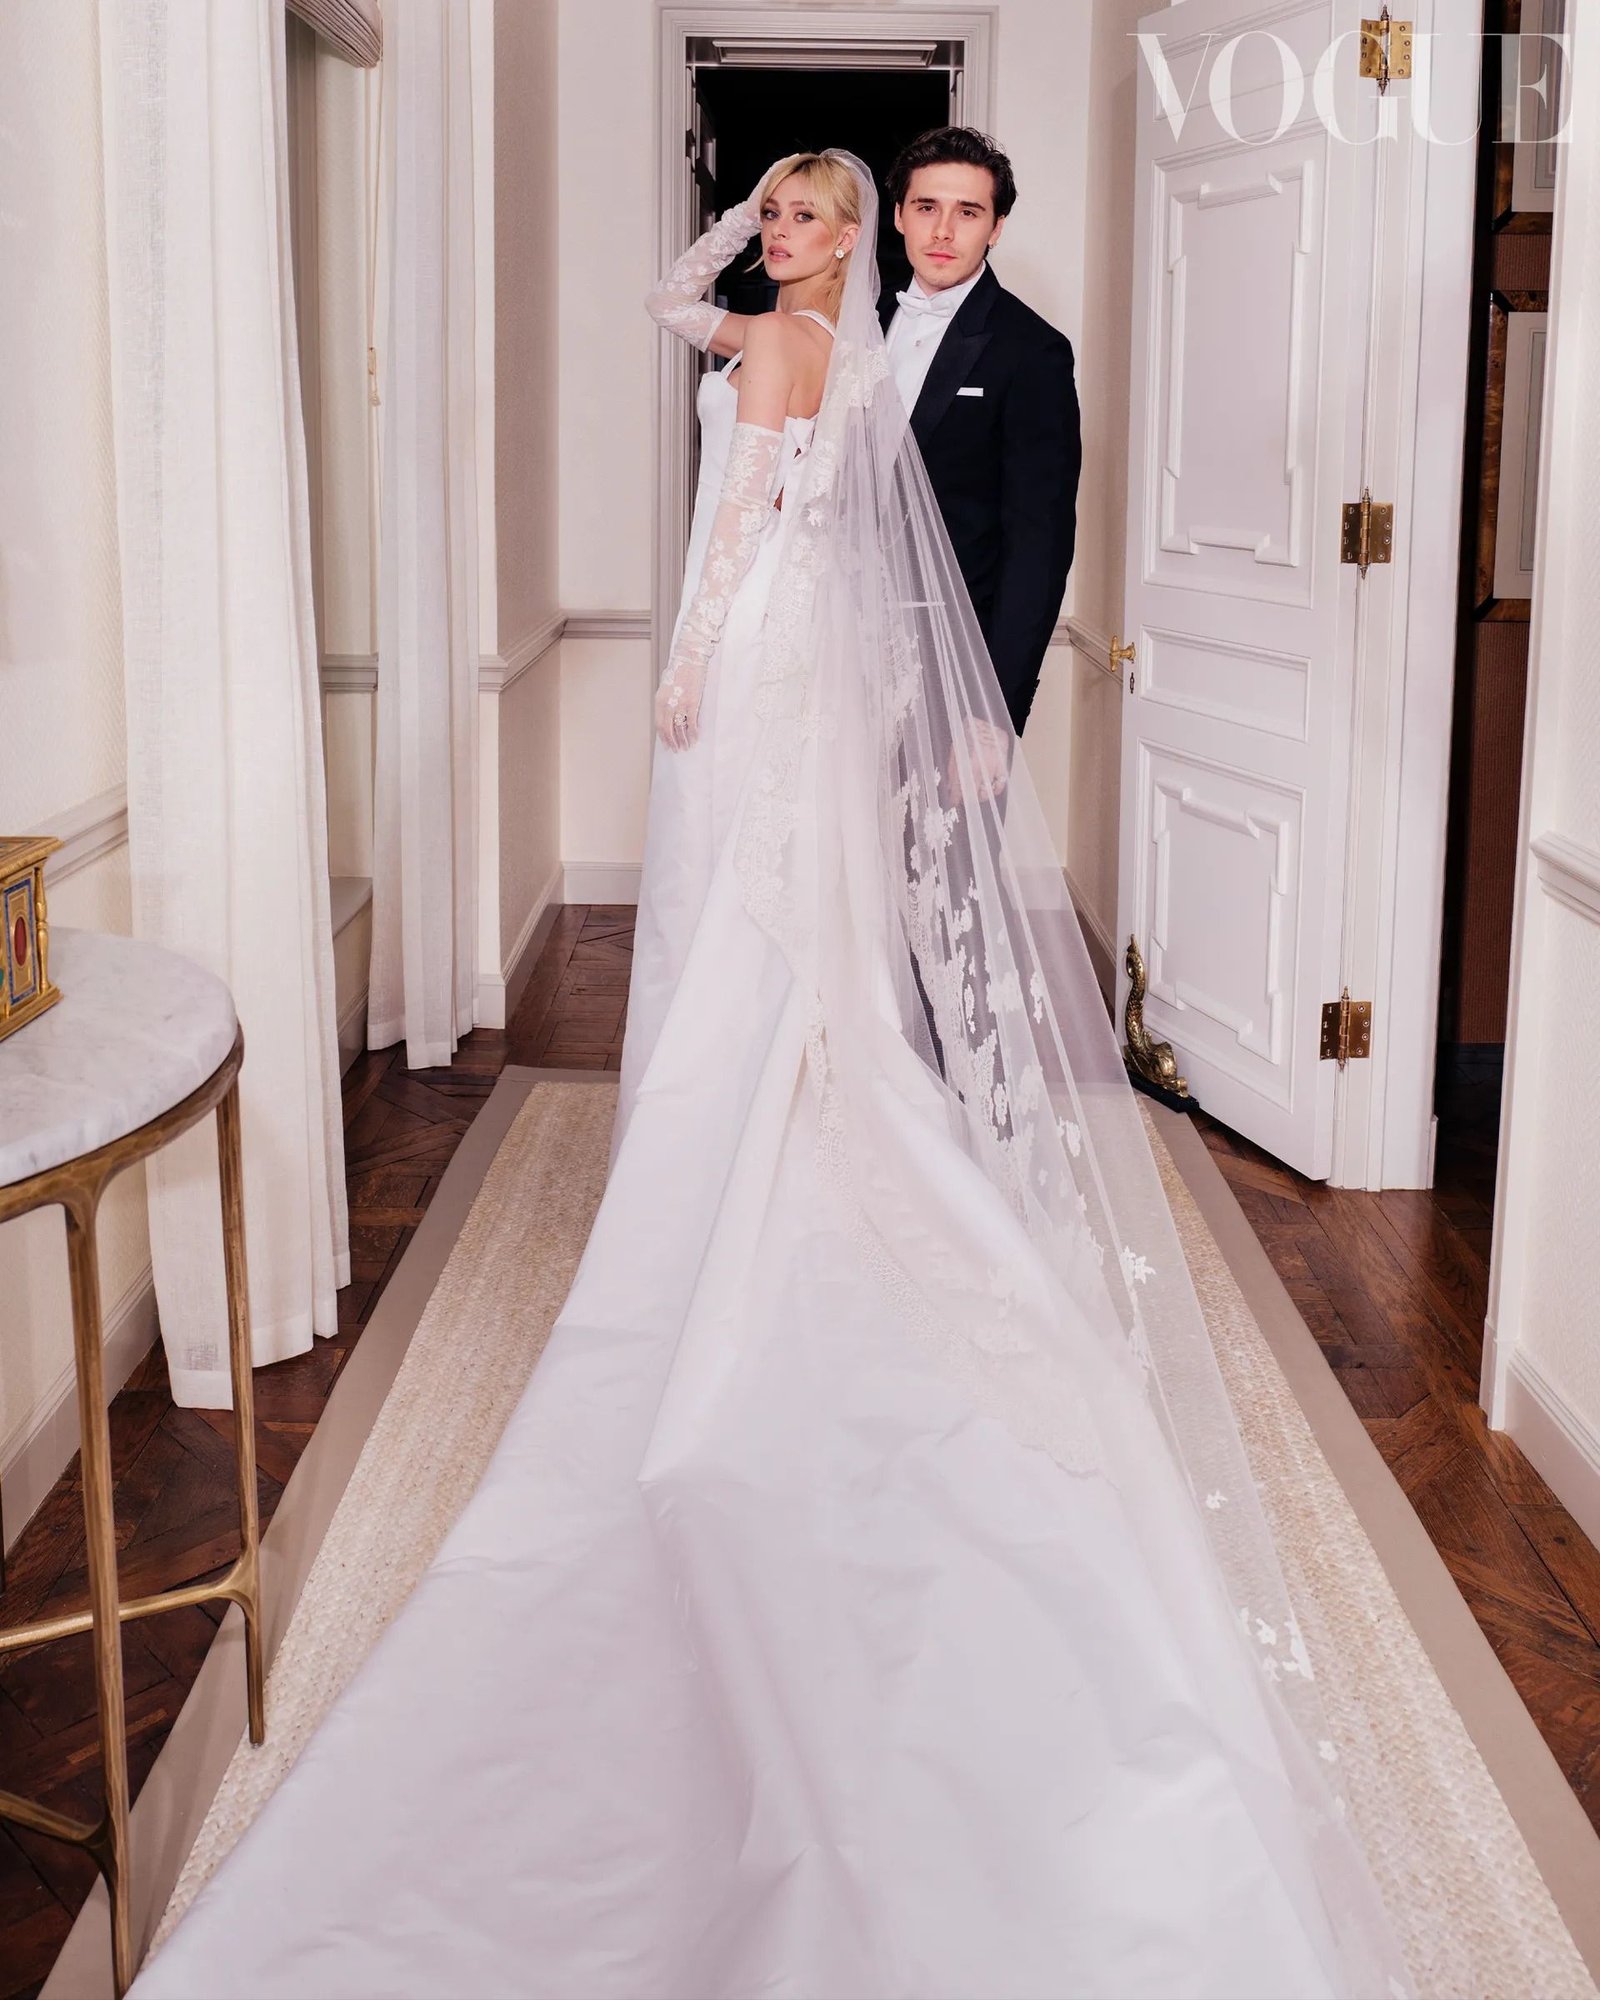 Victoria Beckham's daughter-in-law wore an expensive Valentino wedding dress like a work of art 1